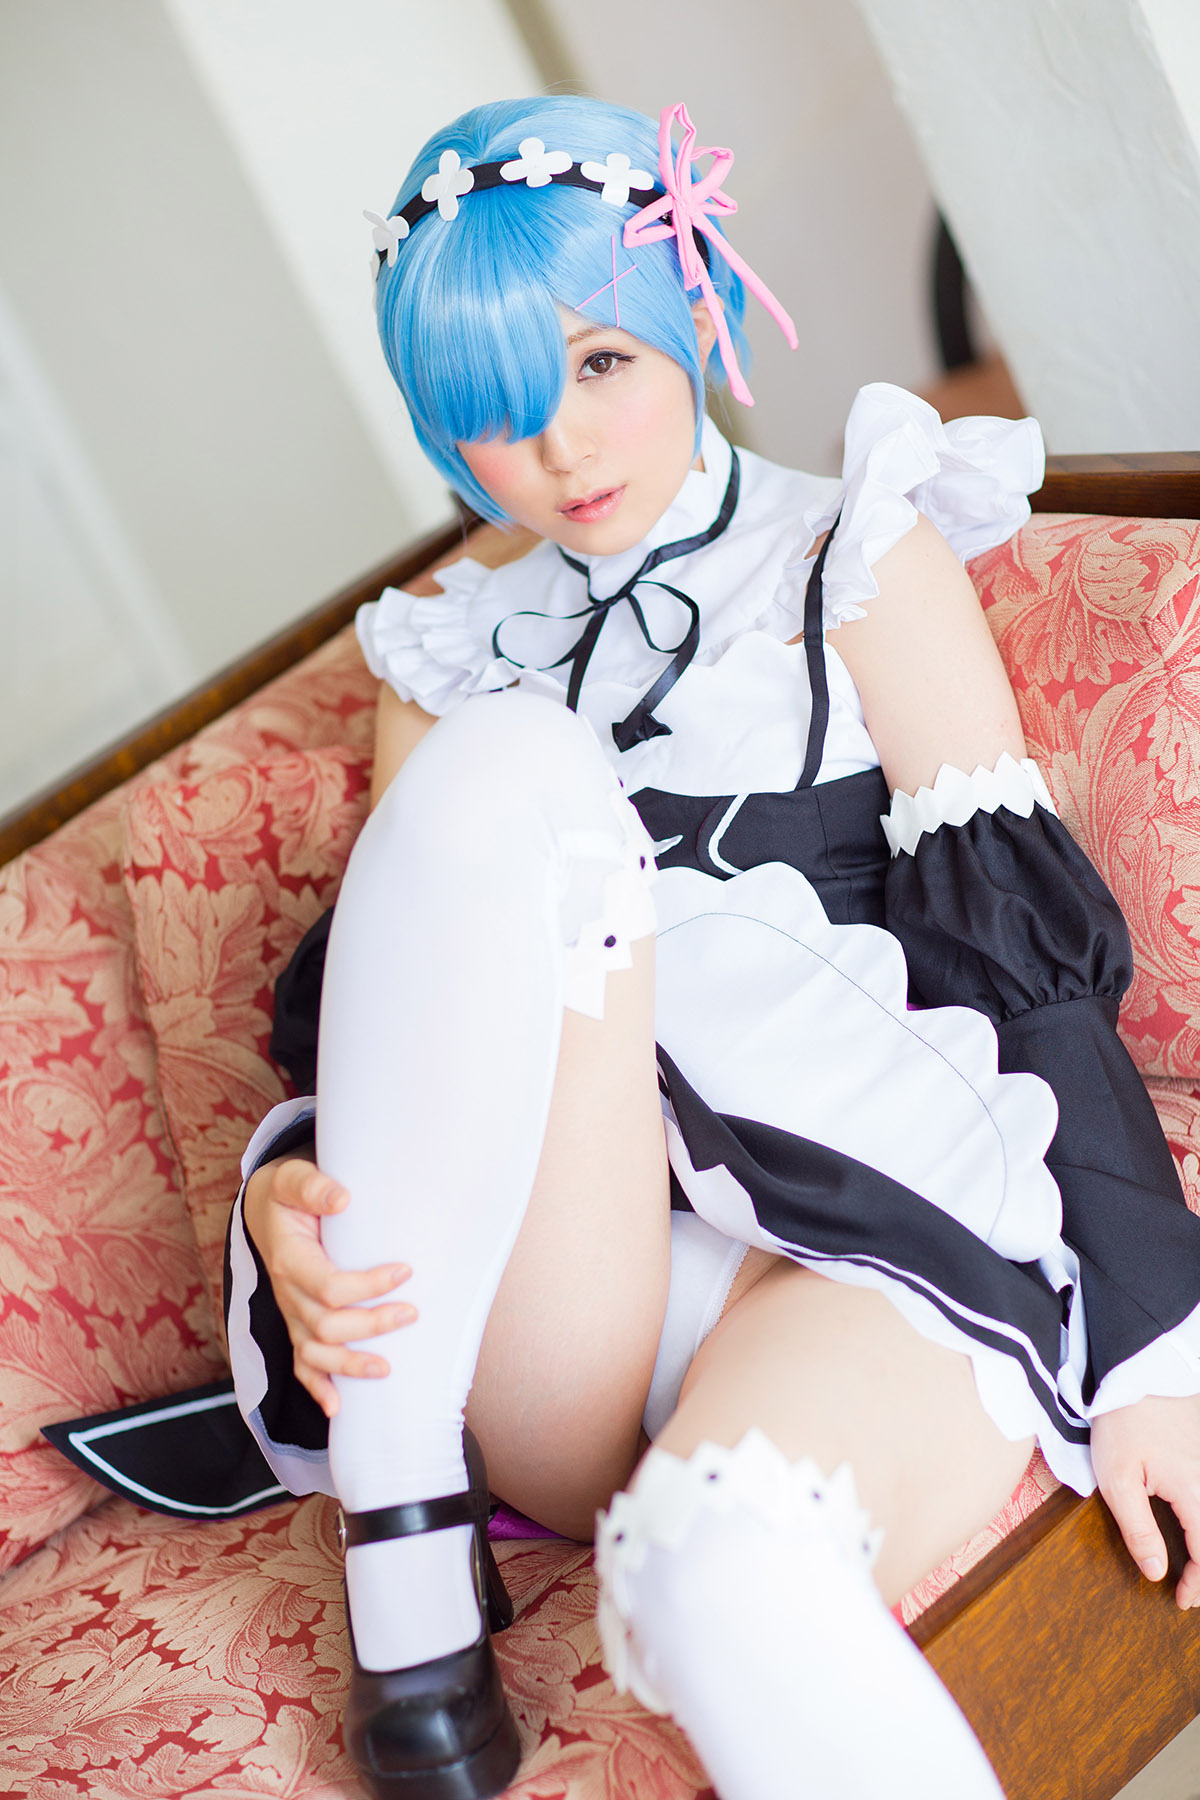 Charming Blue haired girl REM ero Cosplay maid in heaven(10)